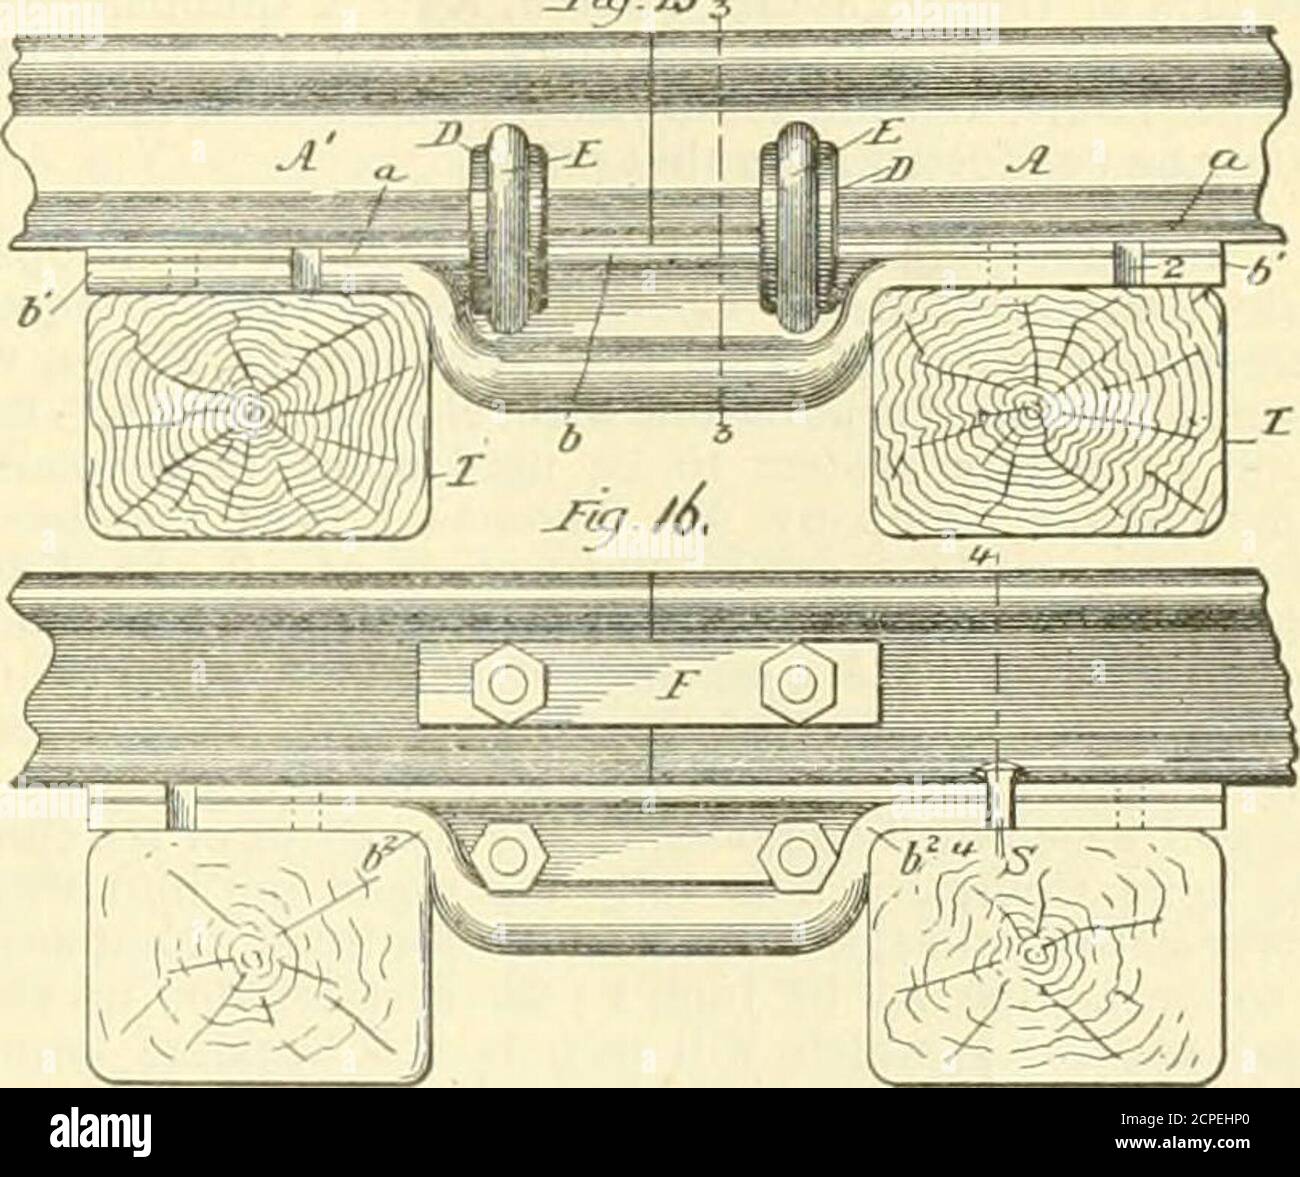 . The railroad and engineering journal . positionby the upper and lower riveting, as indicated. By makingthese pans of continuous pressed steel, as indicated, the weightc^ the front of the engine is lightened, which is a great advan-tage at that point, where weight is useless, and the fittings them-selves are superior, owing to their great strength, lightness, andcheapness. in.—lynds rail-joint. Mr. Ives Lynd, of Troy, N. Y., has patented the rail-jointillustrated by the engravings, which are so clear that they donot require any description. It is shown in figs. 12, 13, and14—fig. 12 being an Stock Photo